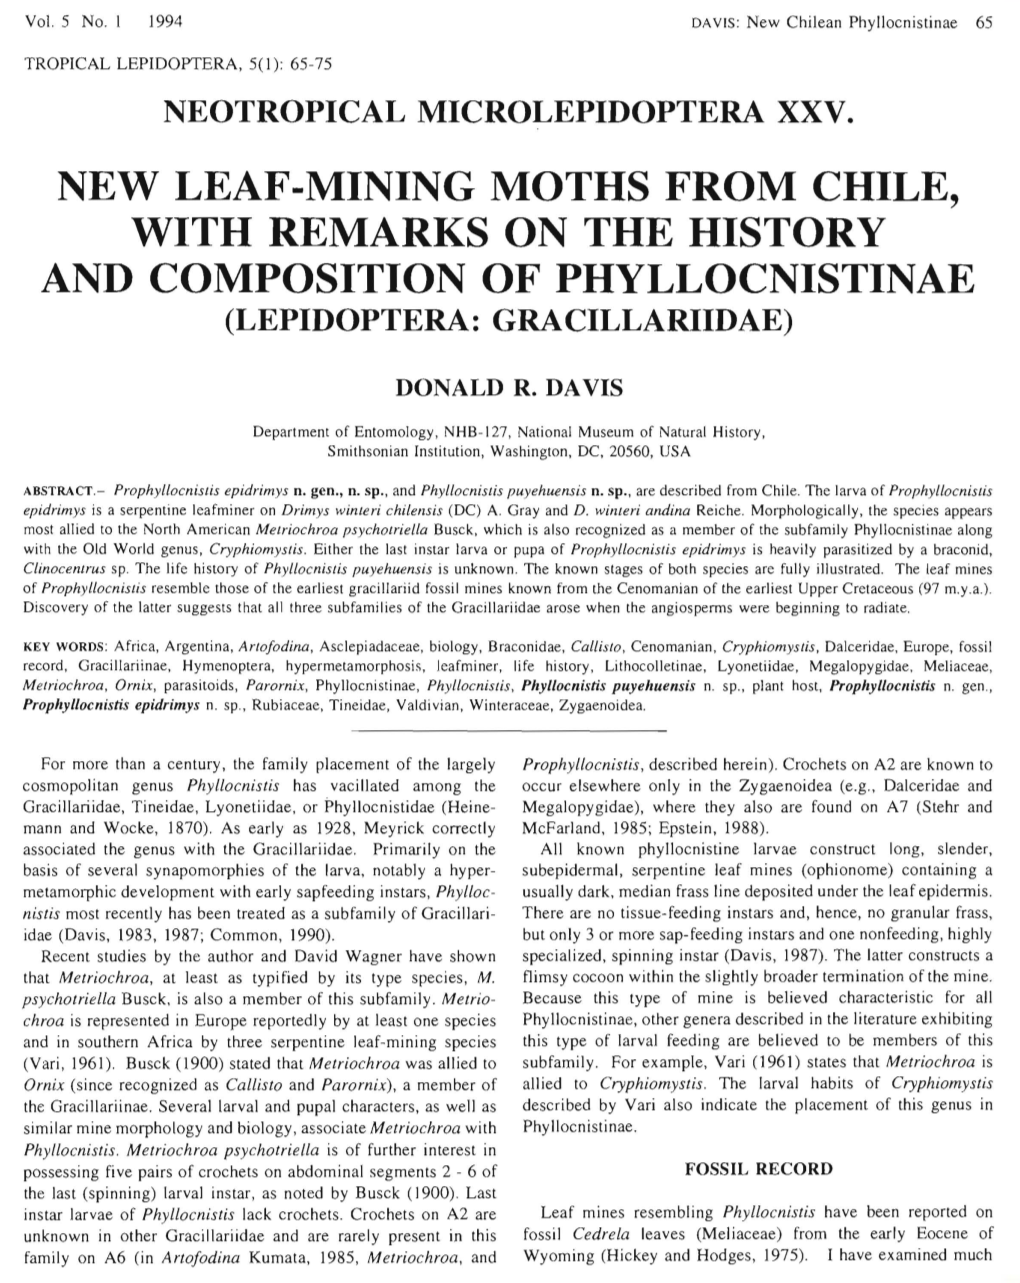 New Leaf -Mining Moths from Chile, with Remarks on the History and Composition of Phyllocnistinae (Lepidoptera: Gracillariidae)